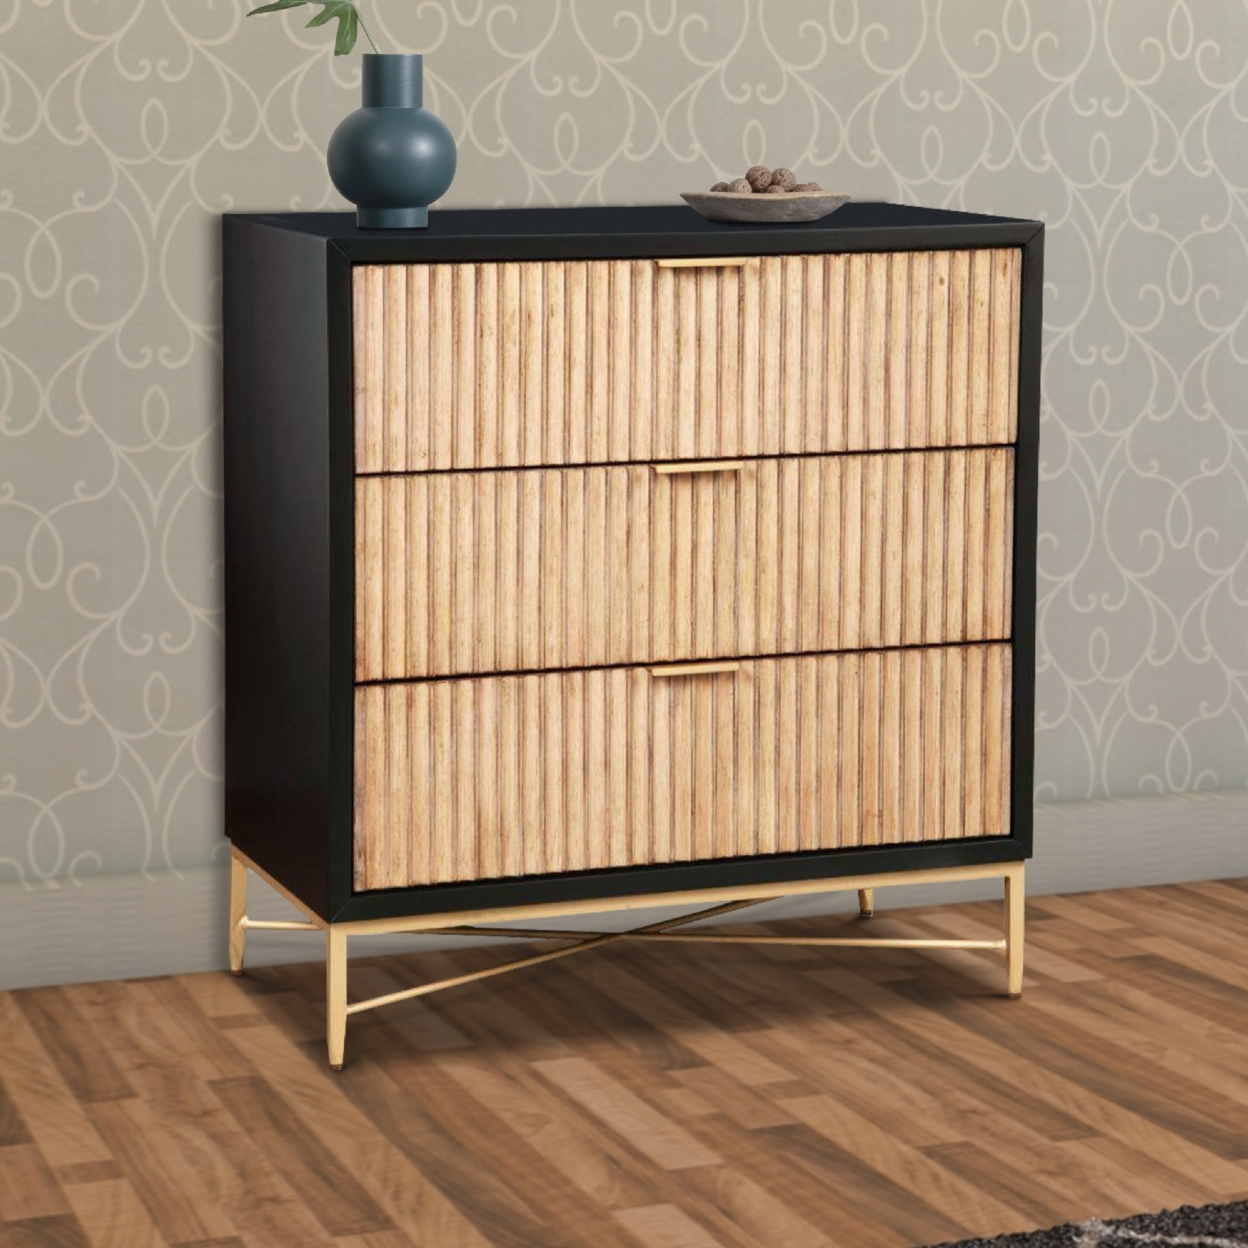 Accent Chest With 3 Corrugated Drawers And Metal Base, Black- Saltoro Sherpi